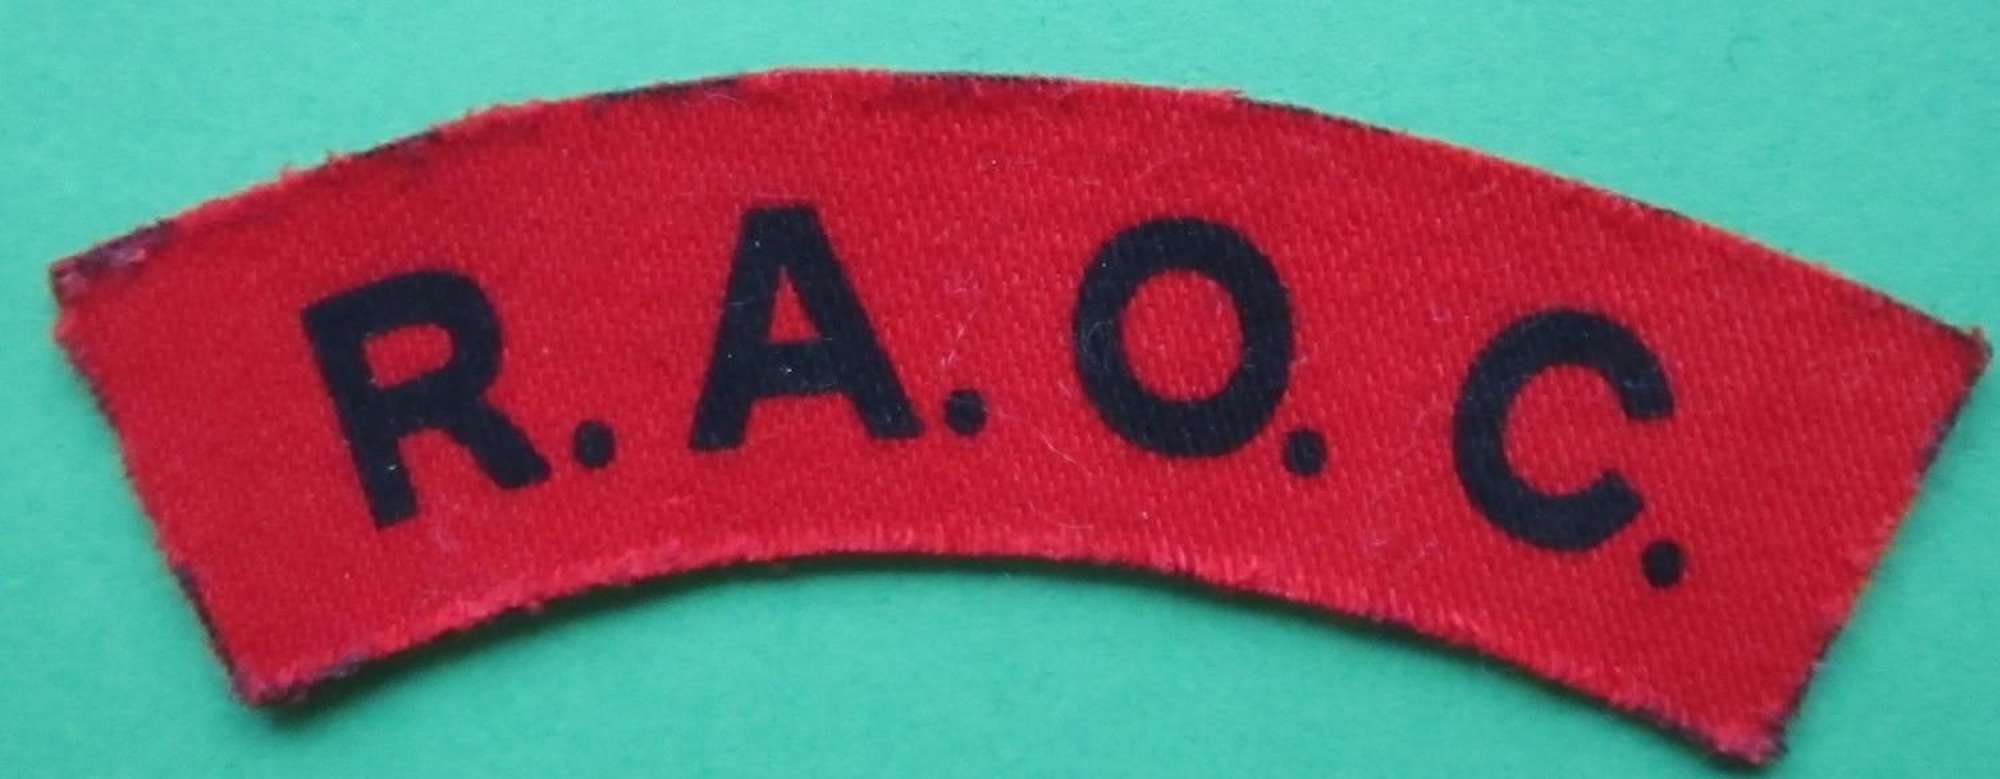 A ROYAL ARMY ORDNANCE CORPS SHOULDER TITLE